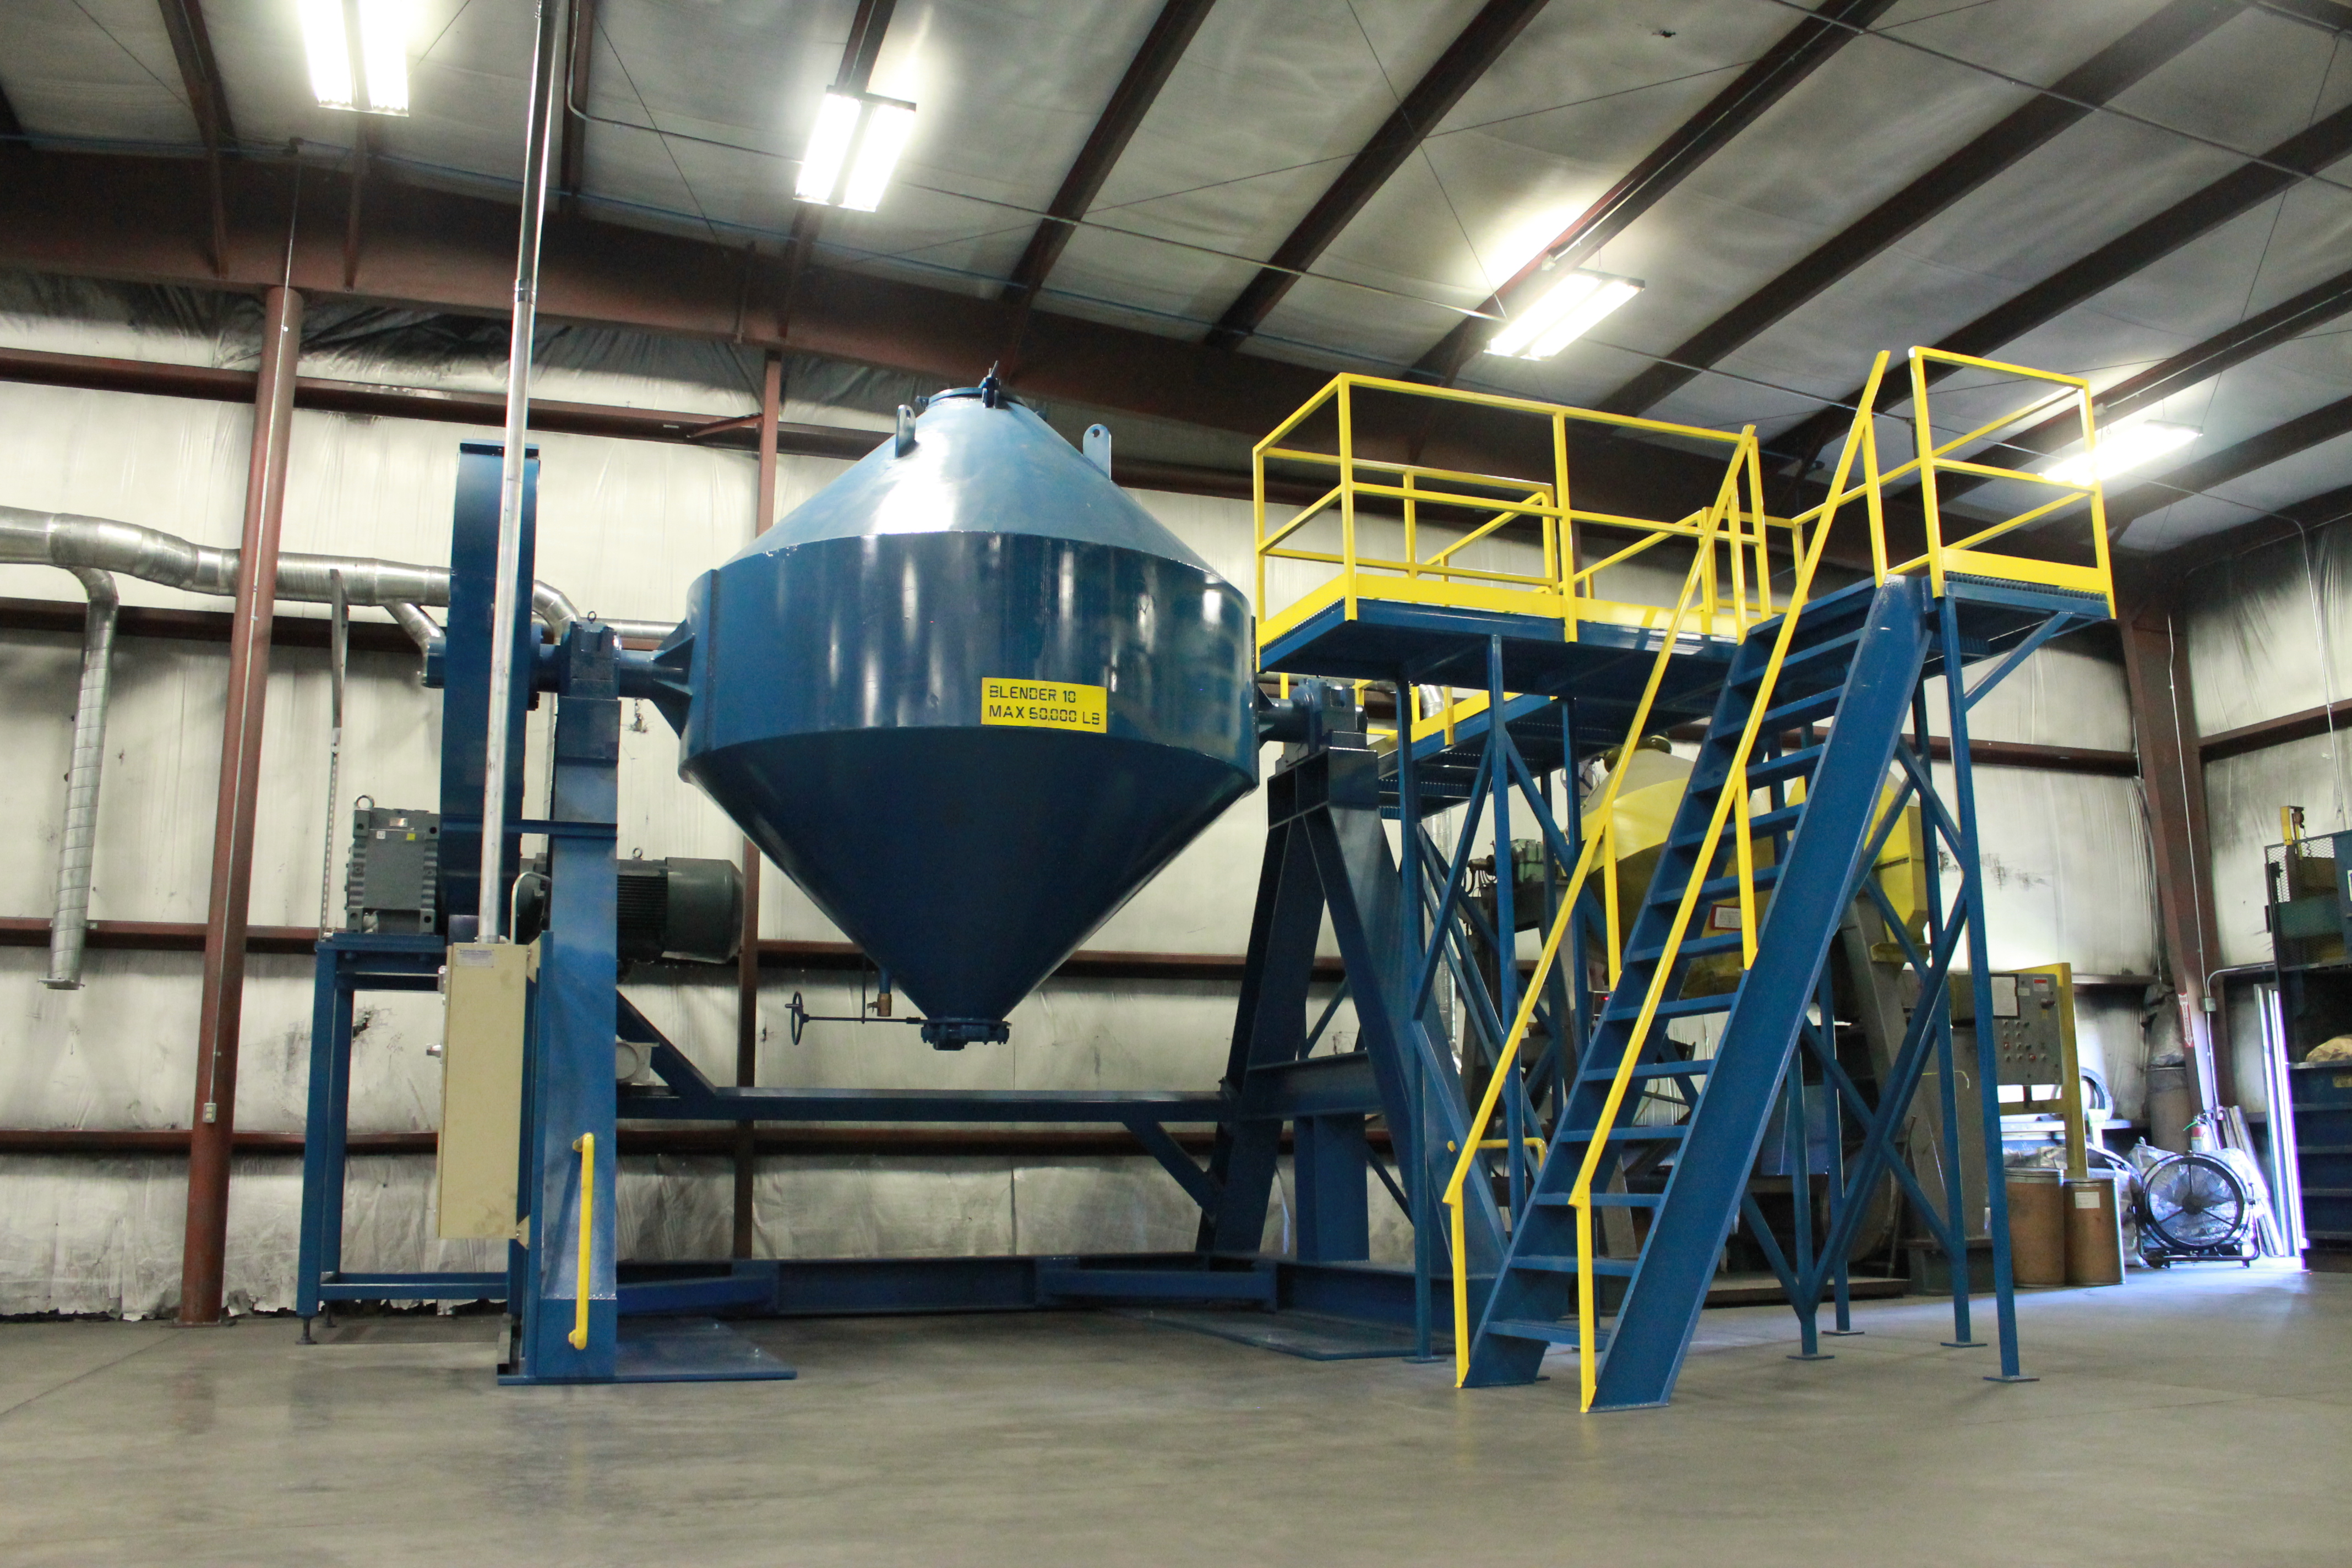 The blender consists of an opposed/double cone design with a maximum metal powder mix operating capacity of 60,000 lbs and total volume of 450 ft3.